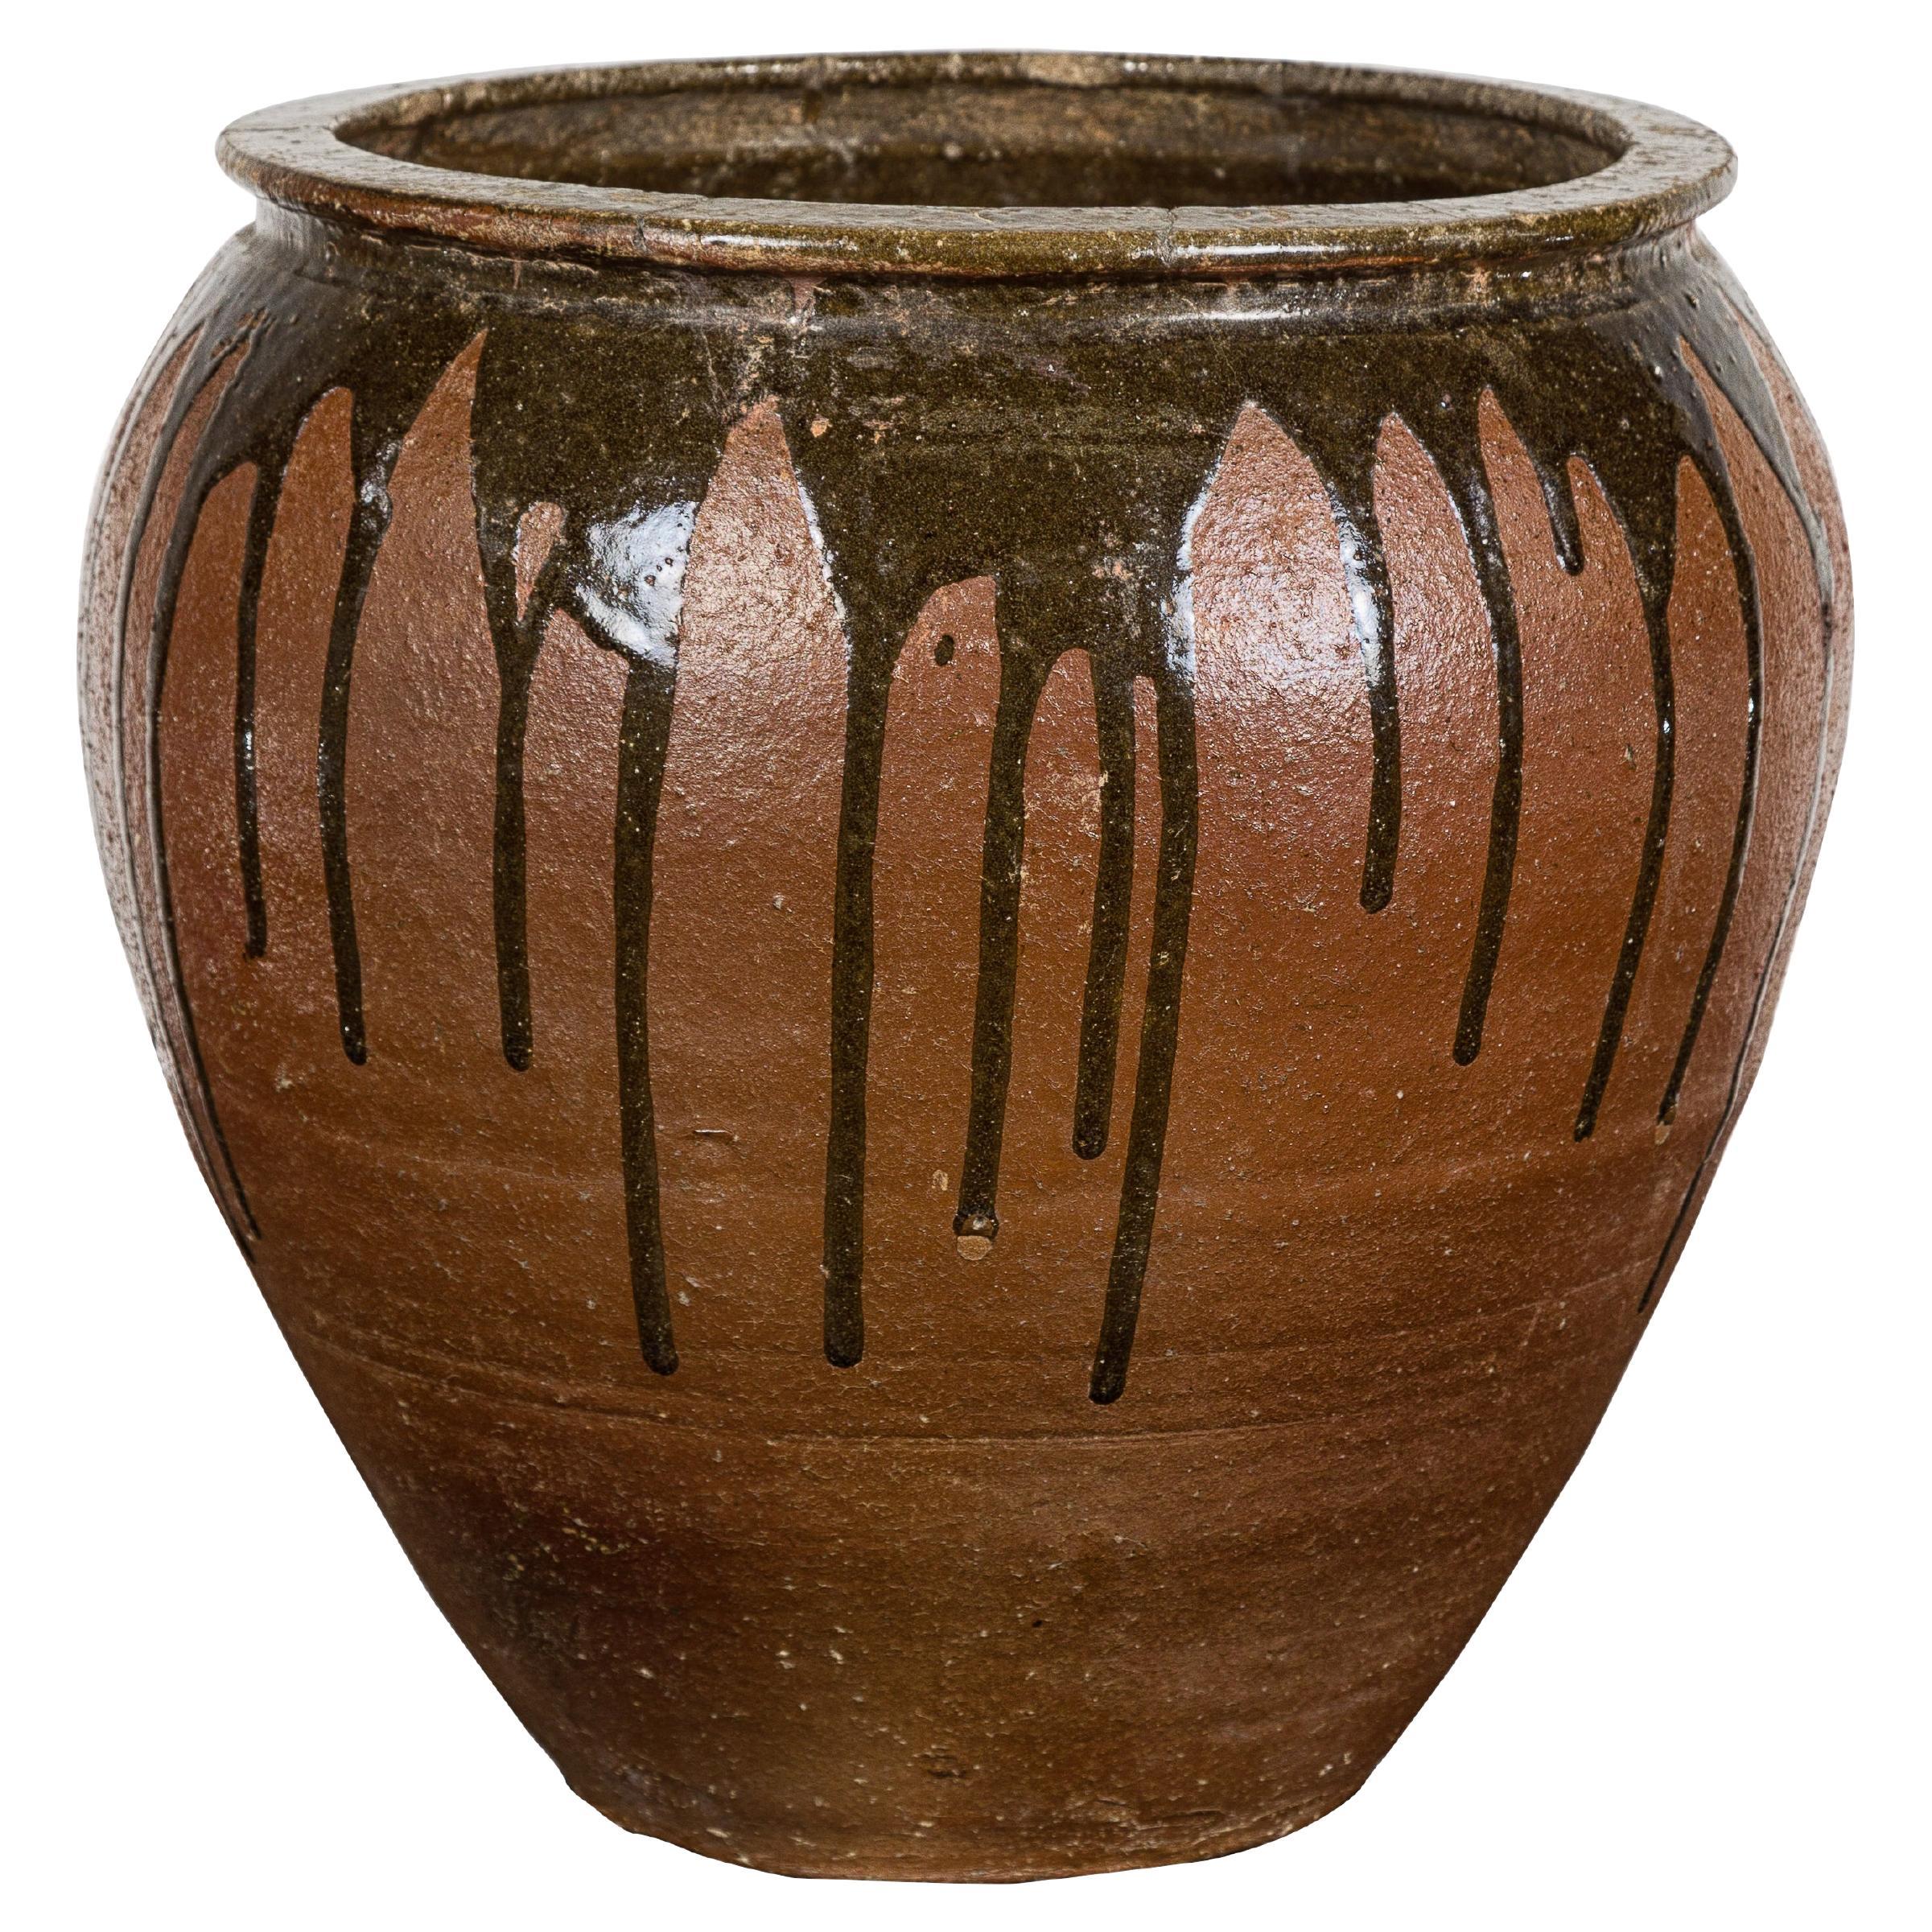 Japanese Tamba Ware Brown Glazed Ceramic Salt Pot Planter with Dripping For Sale